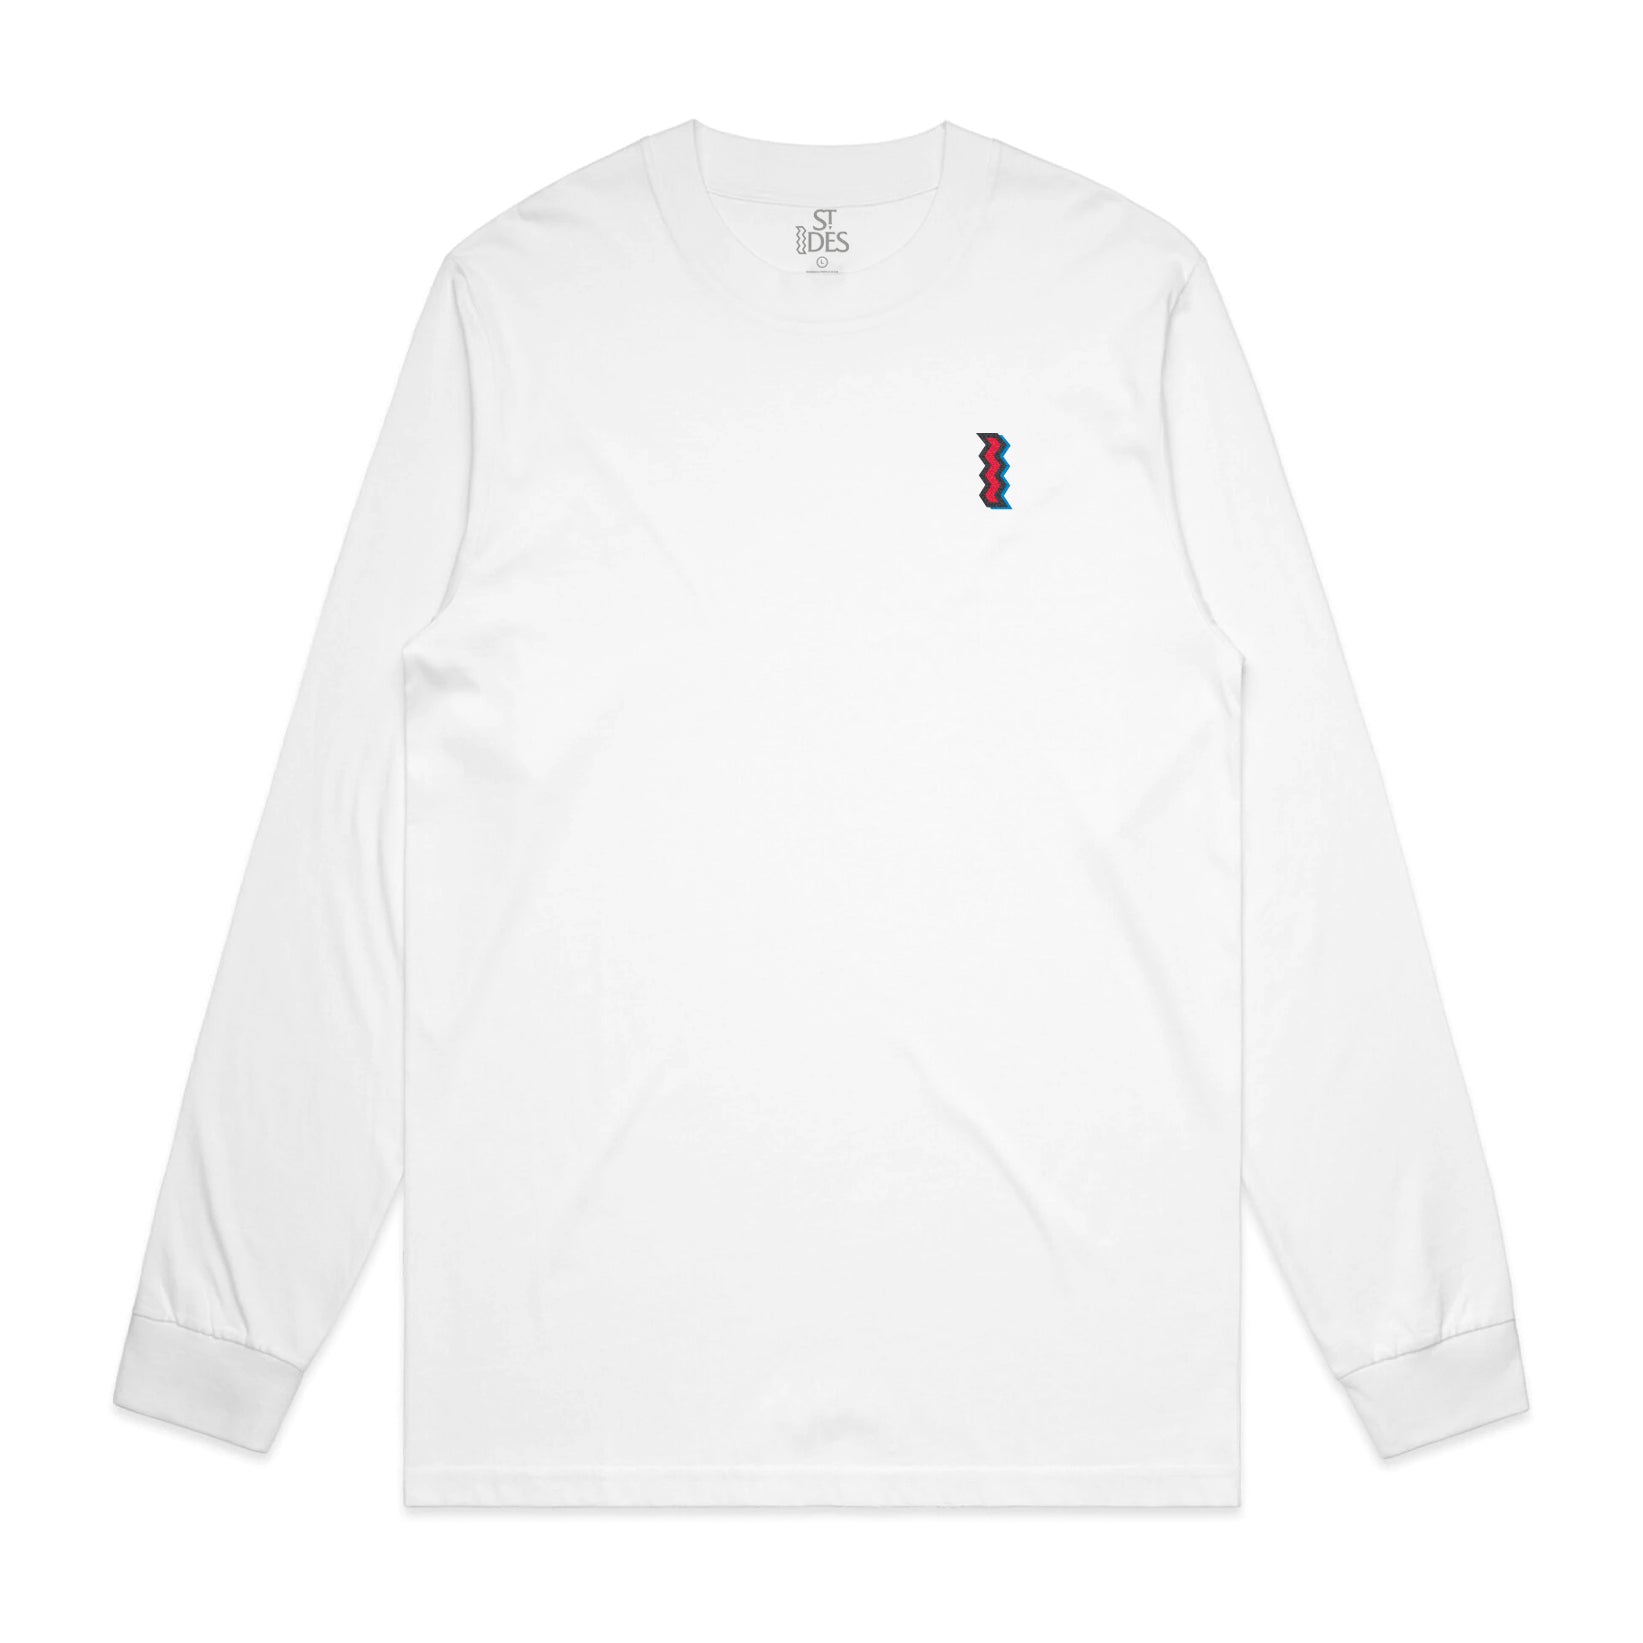 ST IDES Official Logo Unisex Long Sleeve Tee Shirt – ST IDES OFFICIAL